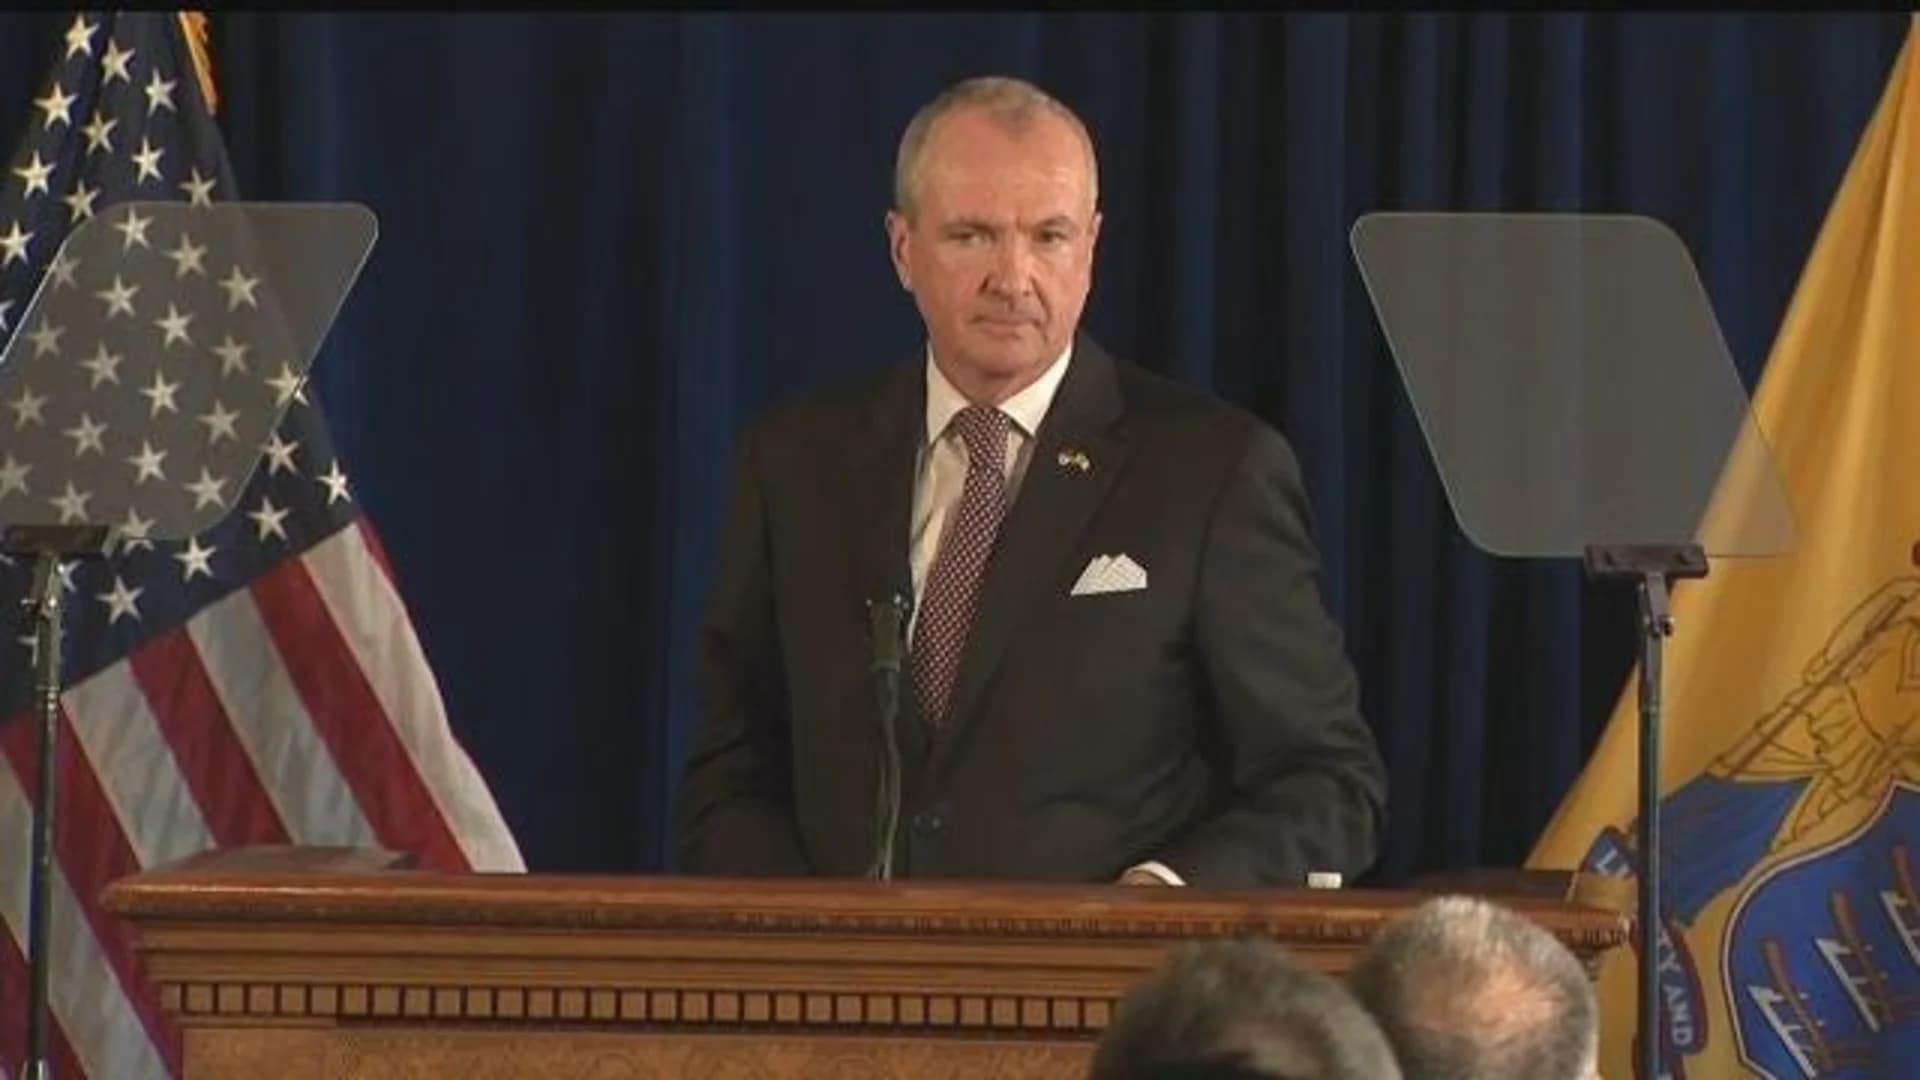 Gov. Murphy gives remarks on state budget ahead of looming deadline